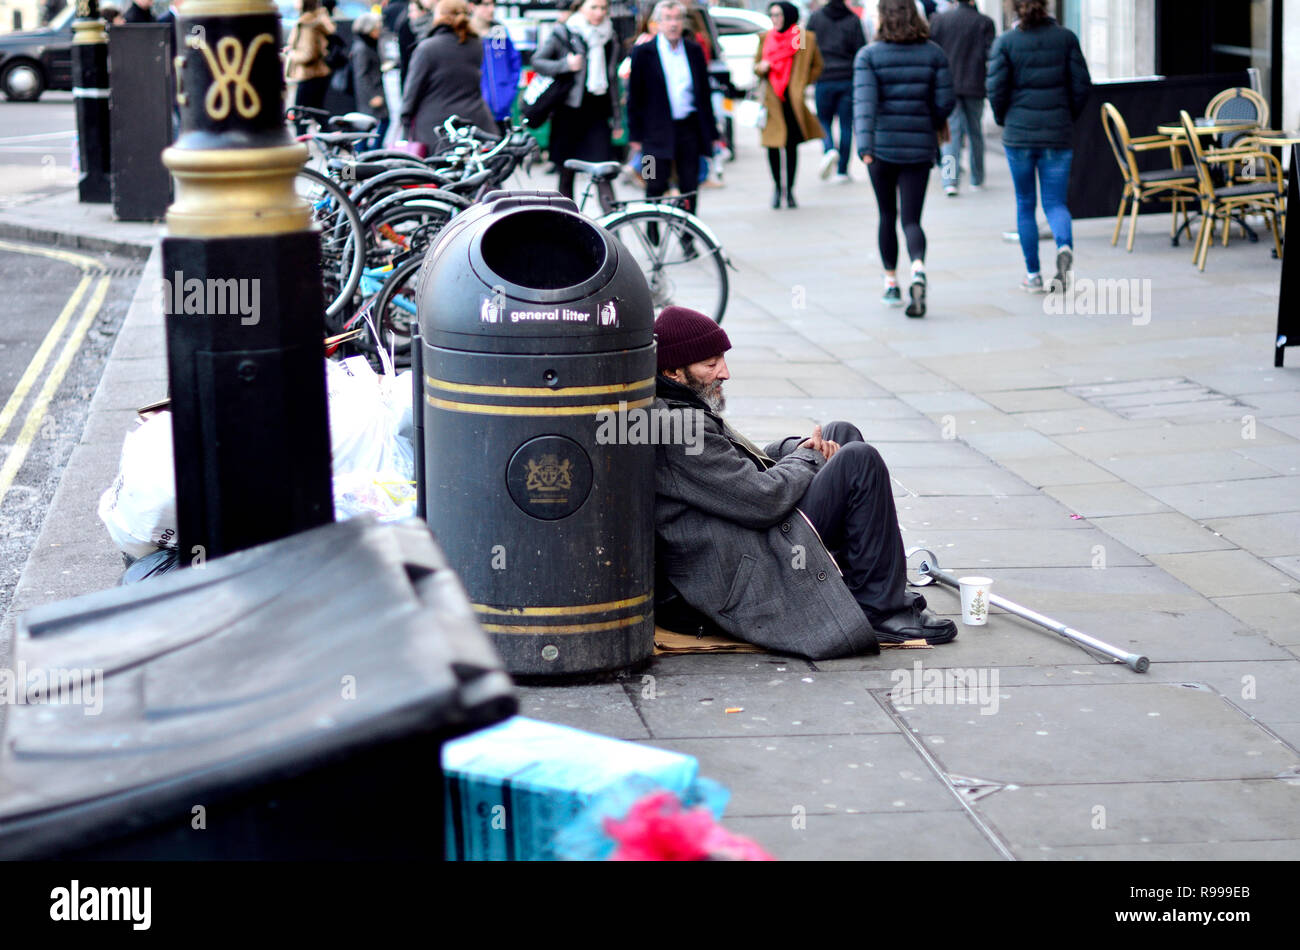 Homeless man with a crutch begging in the street London, England, UK. Stock Photo